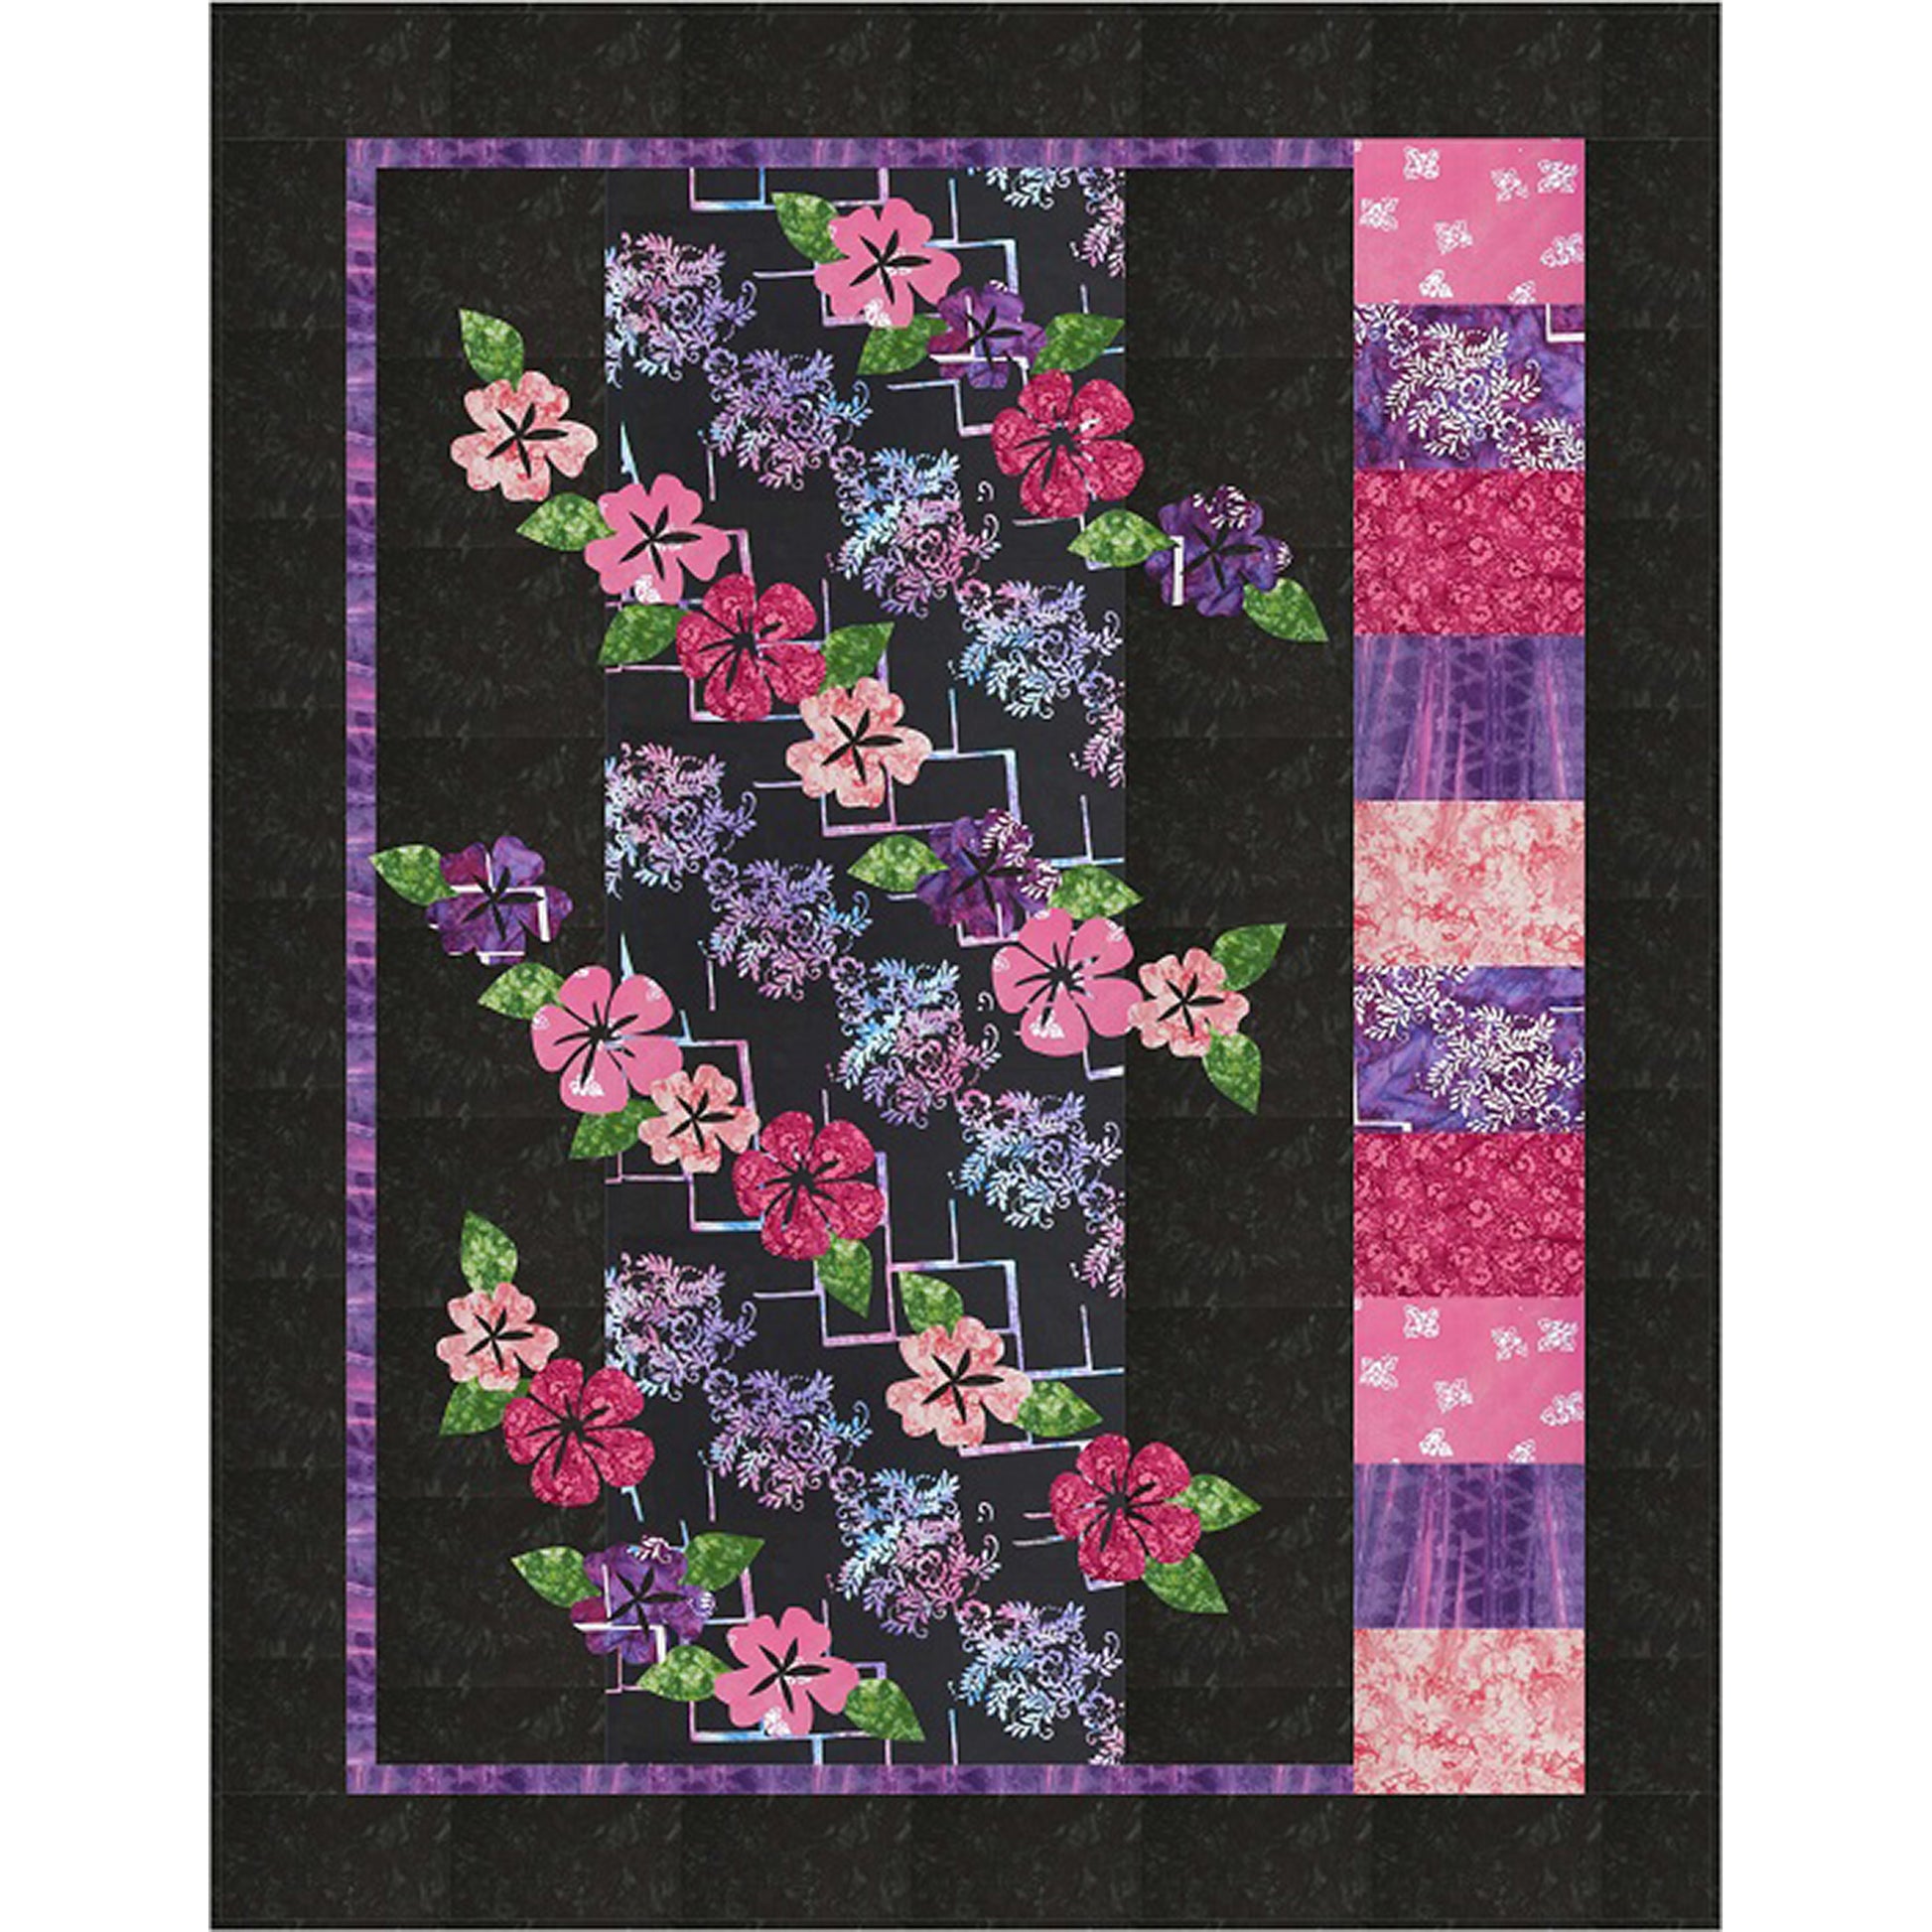 Floral quilt with appliqued flowers in pinks and purple over a lattice fabric with bright colored blocks to the right which all pop because of black background color.